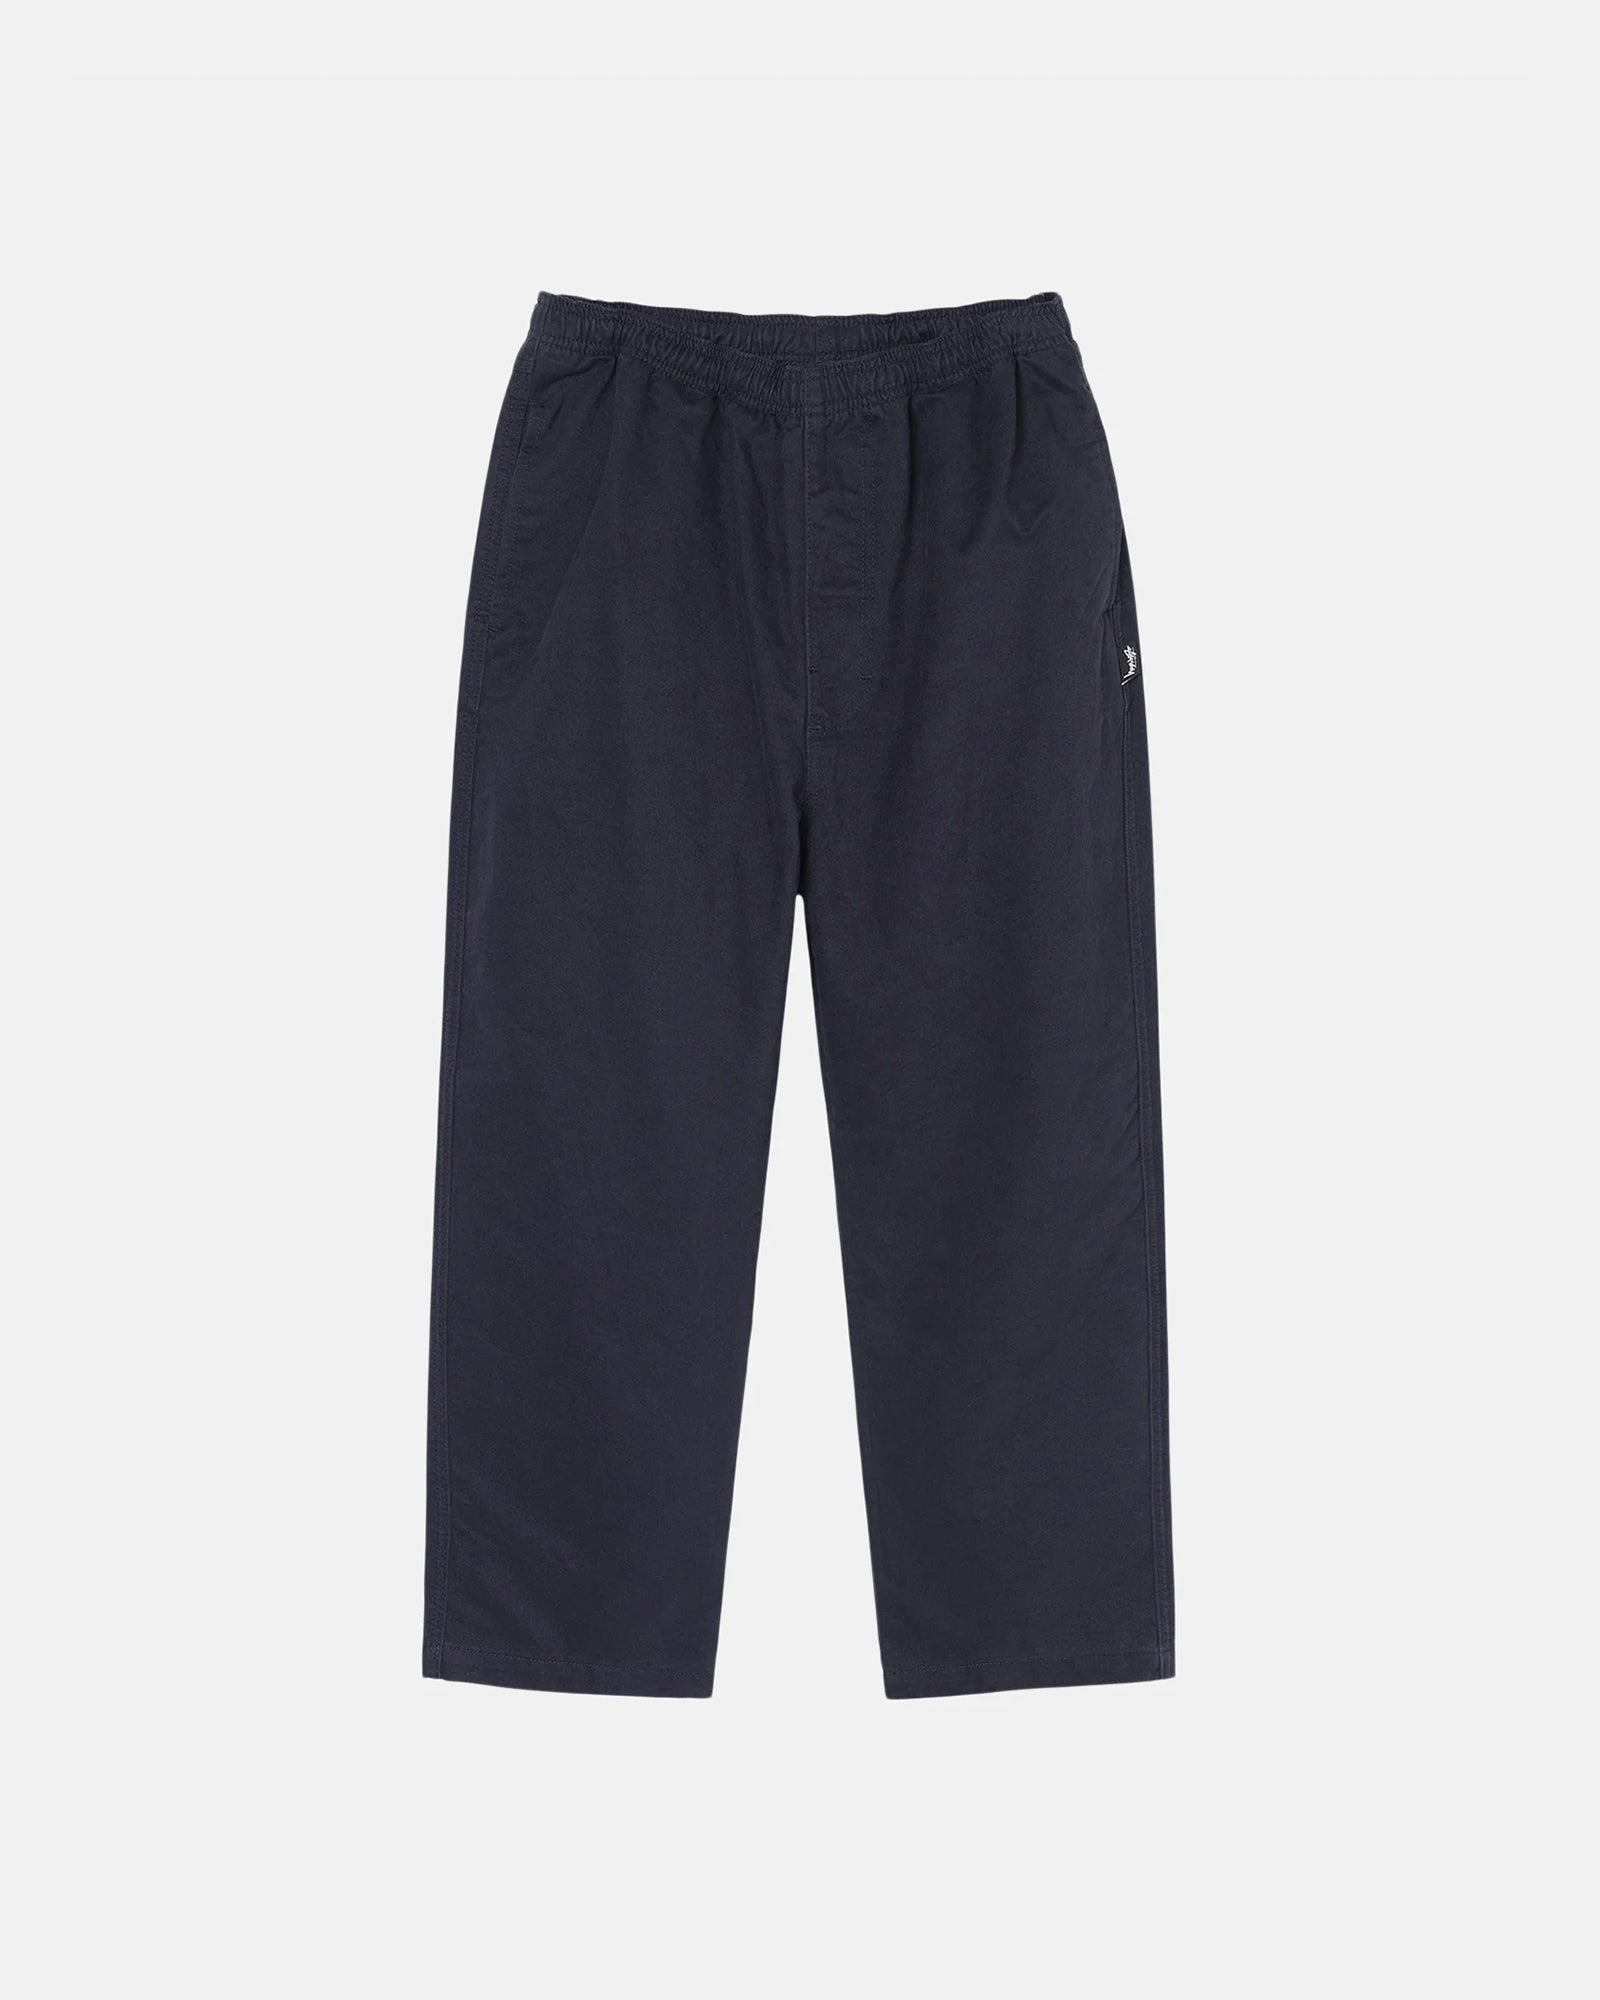 BEACH PANT BRUSHED COTTON